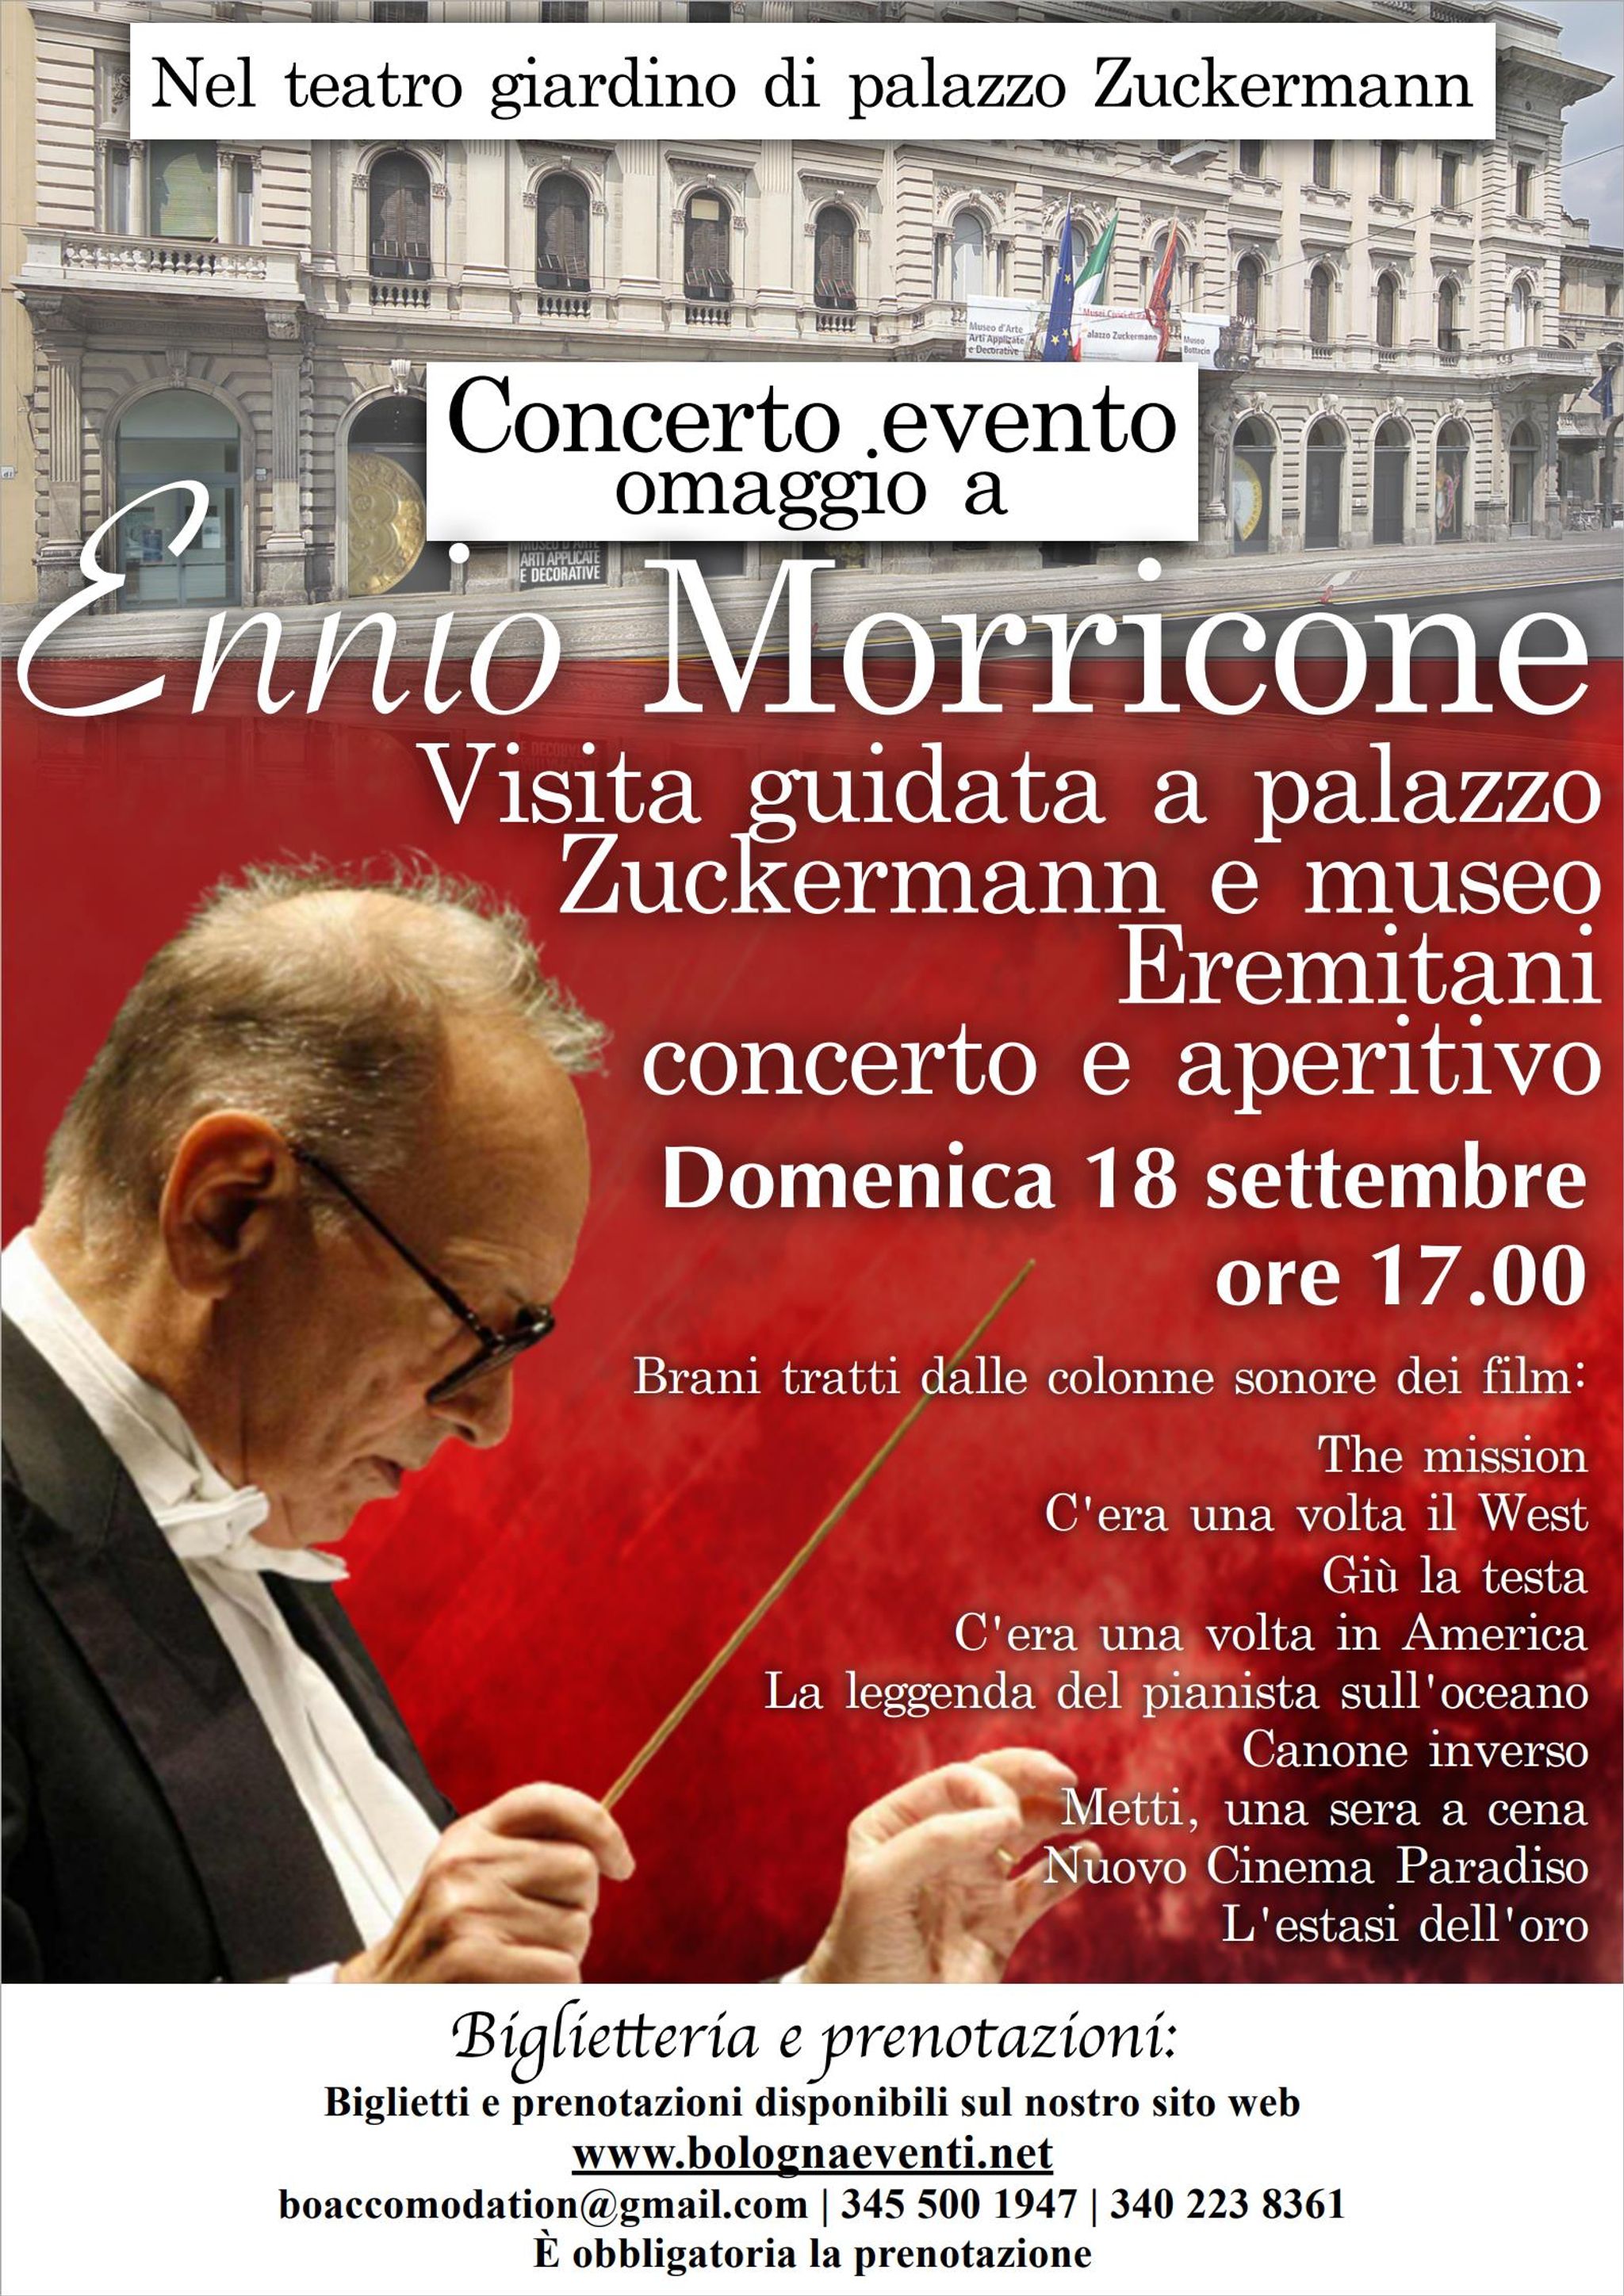 Aperitif concert with guided tour - Tribute to Ennio Morricone